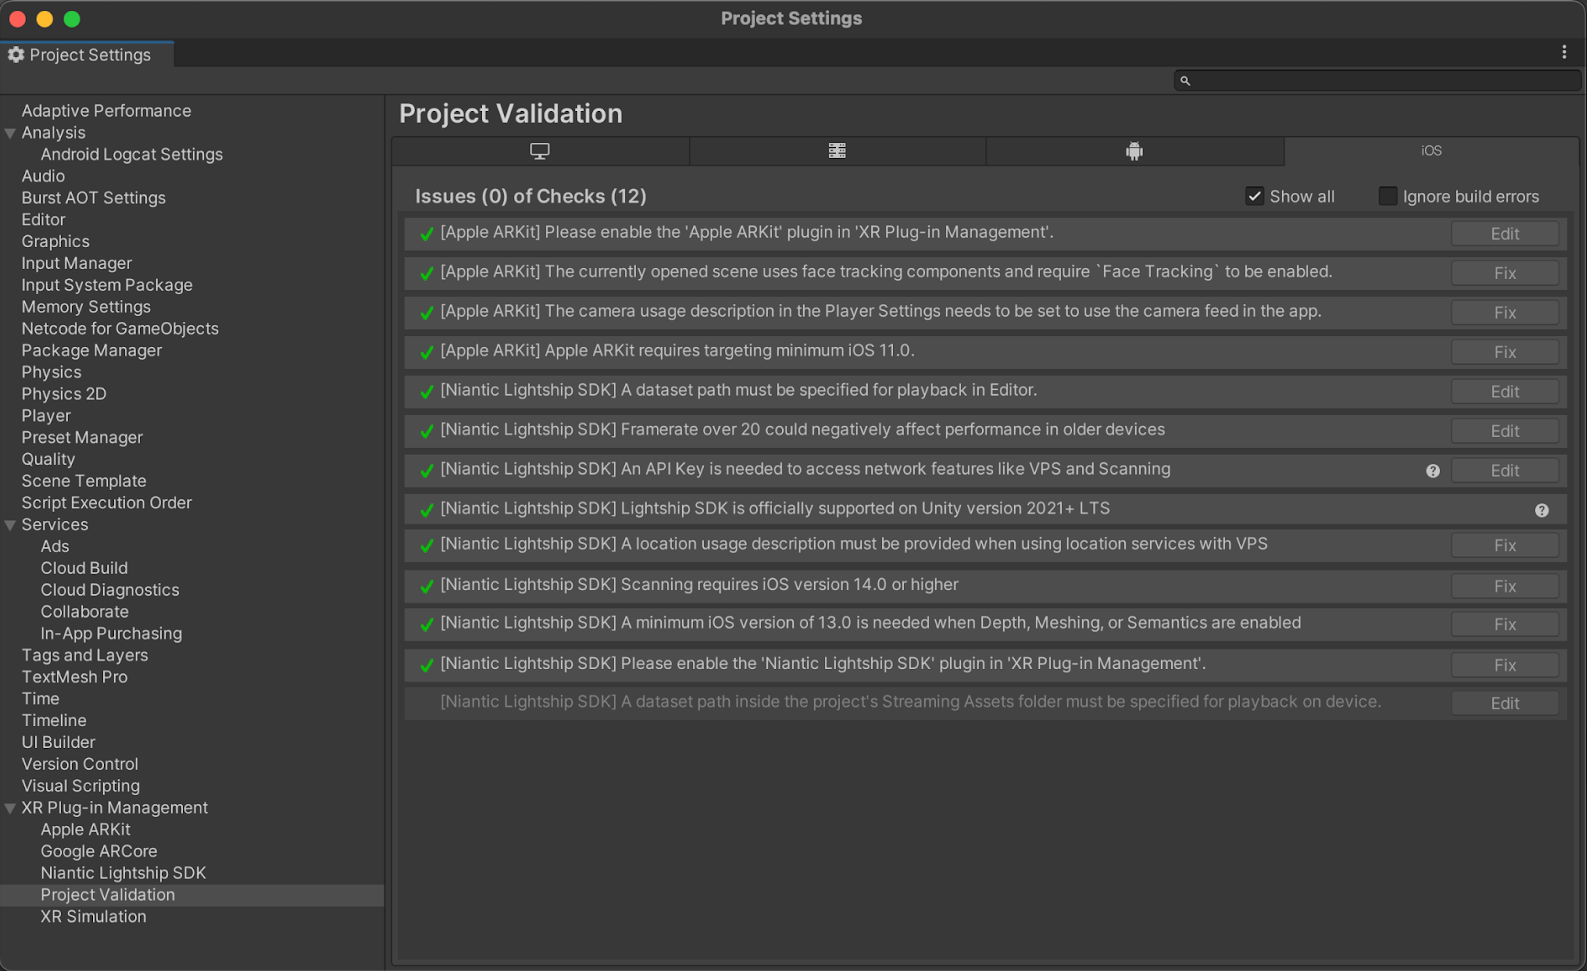 A list of project validation options and buttons to automatically fix them.